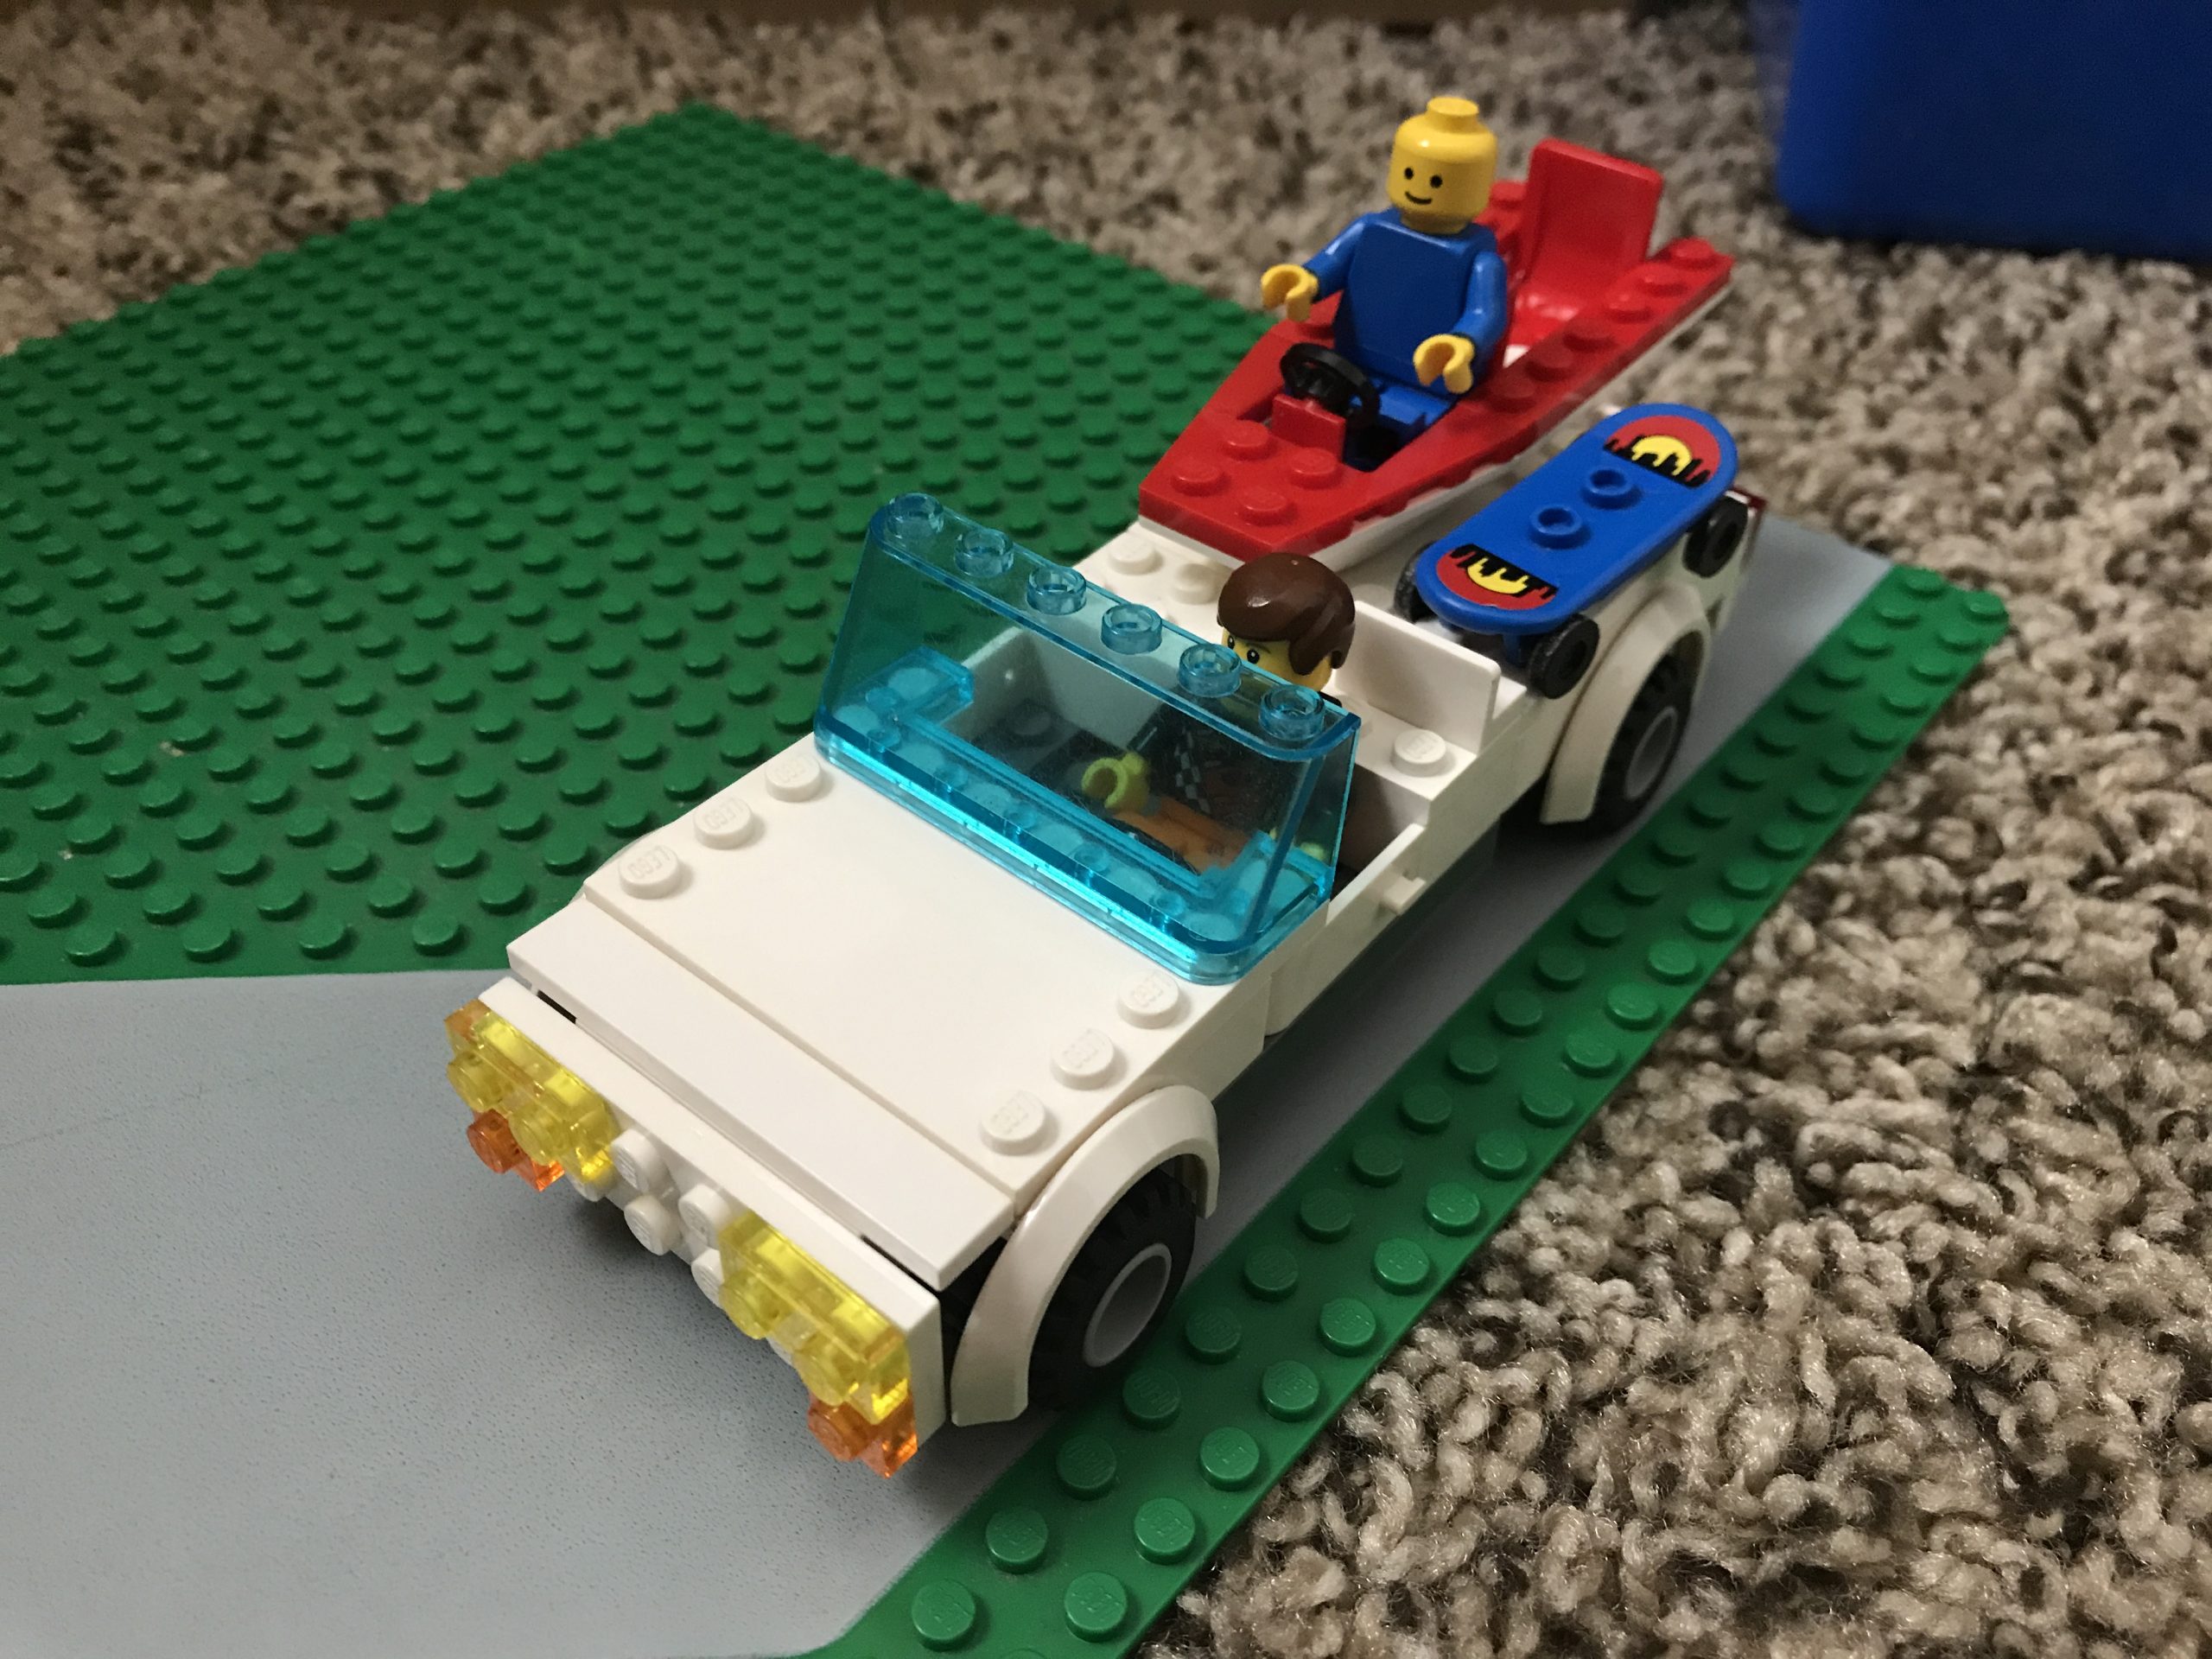 Lego Truck with Jet-ski and Skateboard